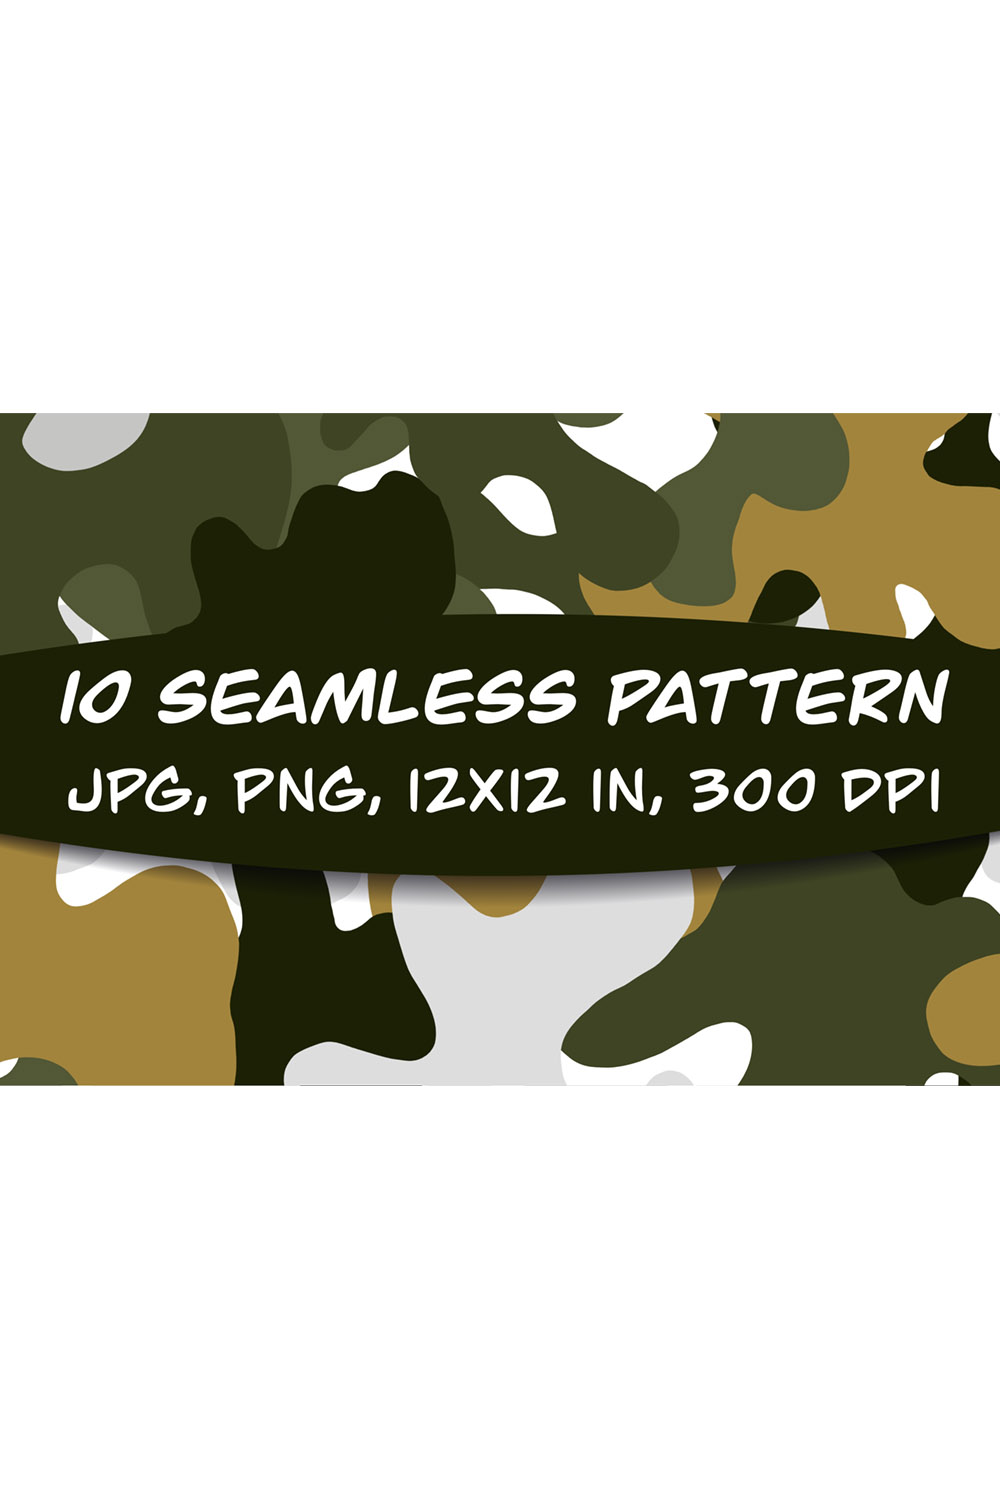 Camouflage Seamless Pattern 10 Army Print Png, Jpg, Camo Digital Paper Military Texture Scrapbooking 12 pinterest preview image.